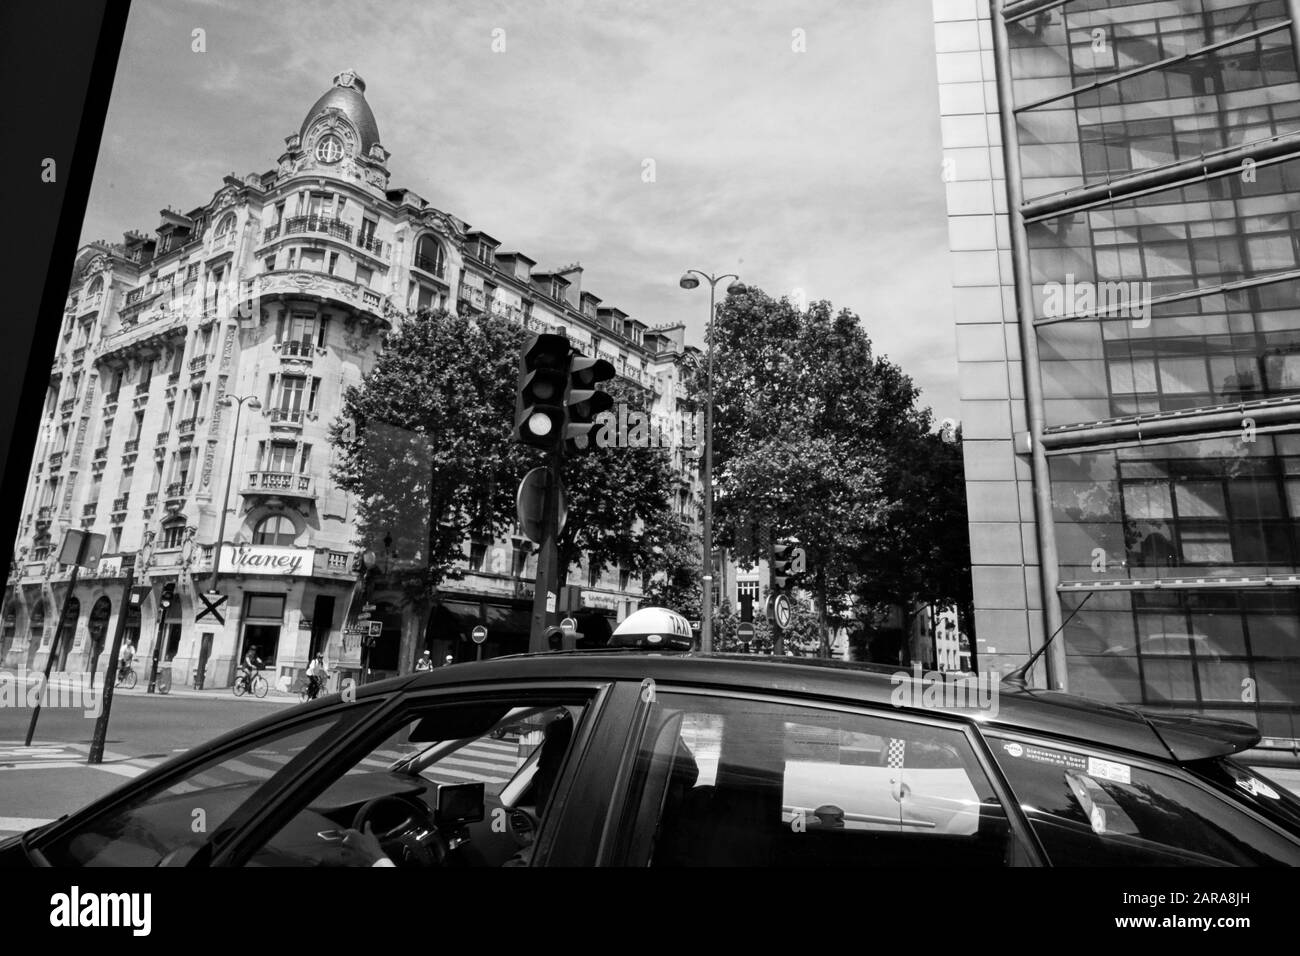 Street with old and new building, signal and taxi, Paris, France, Europe Stock Photo